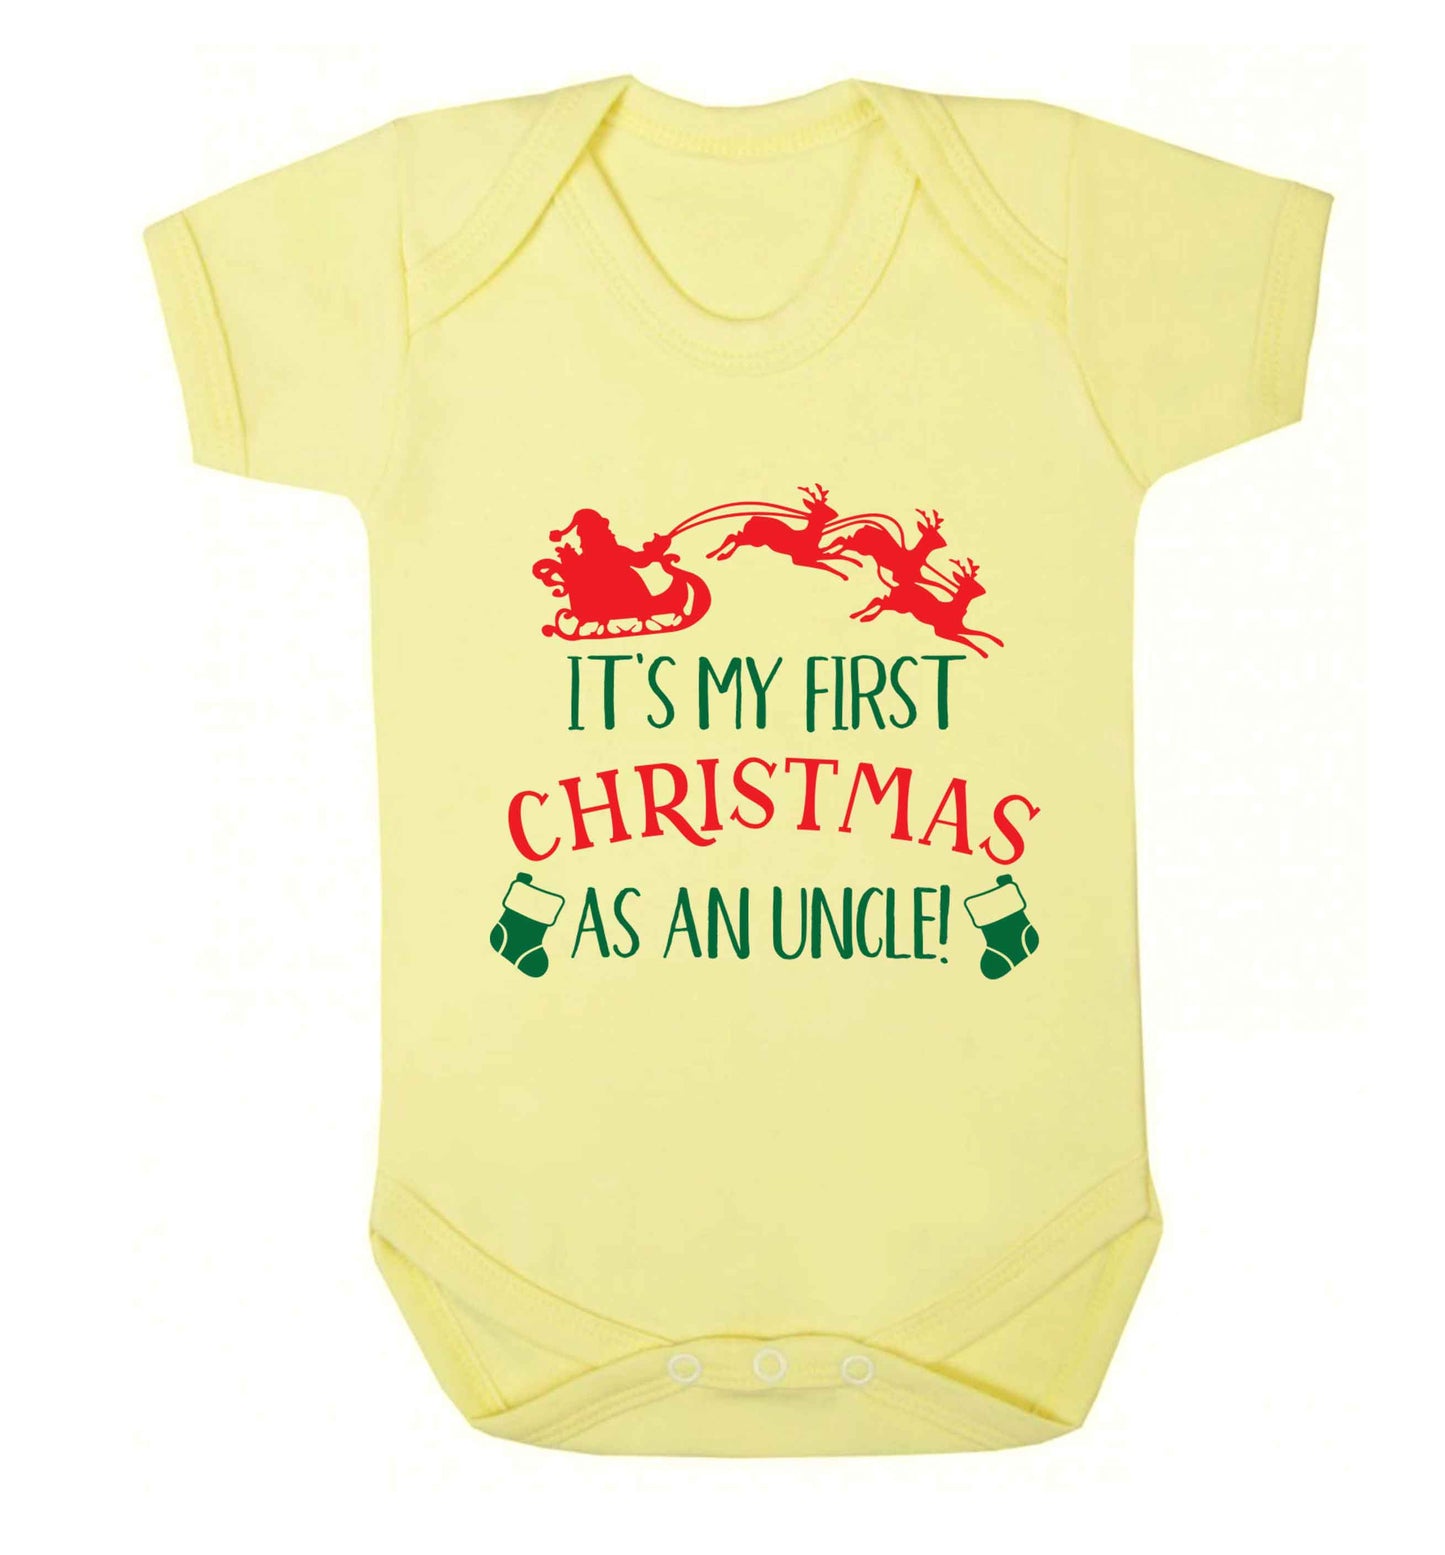 It's my first Christmas as an uncle! Baby Vest pale yellow 18-24 months